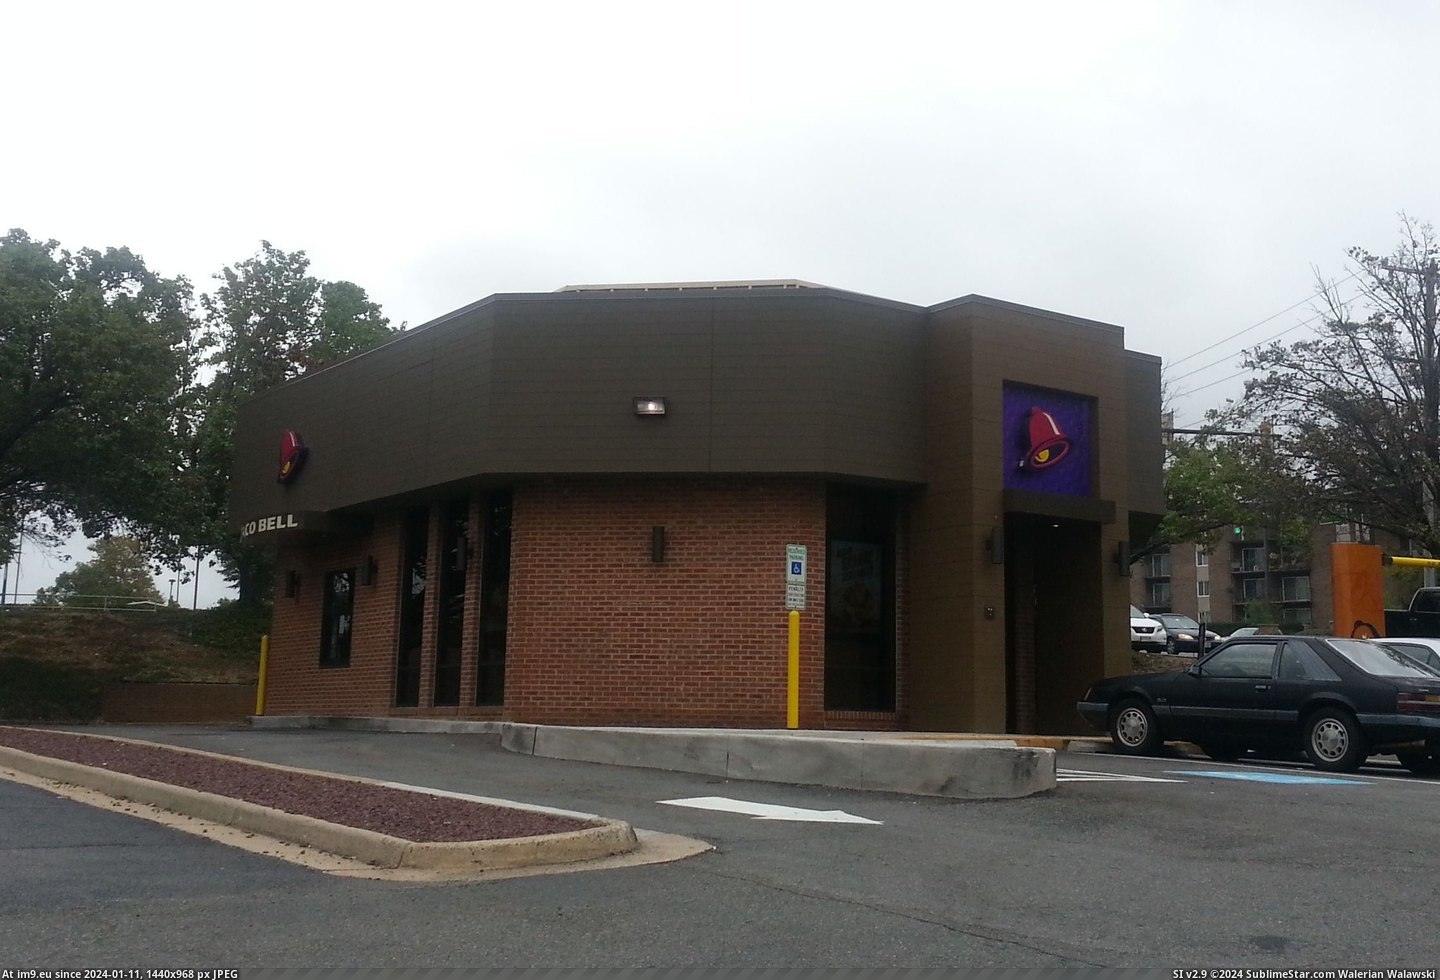 [Mildlyinteresting] This Taco Bell used to be a bank (in My r/MILDLYINTERESTING favs)